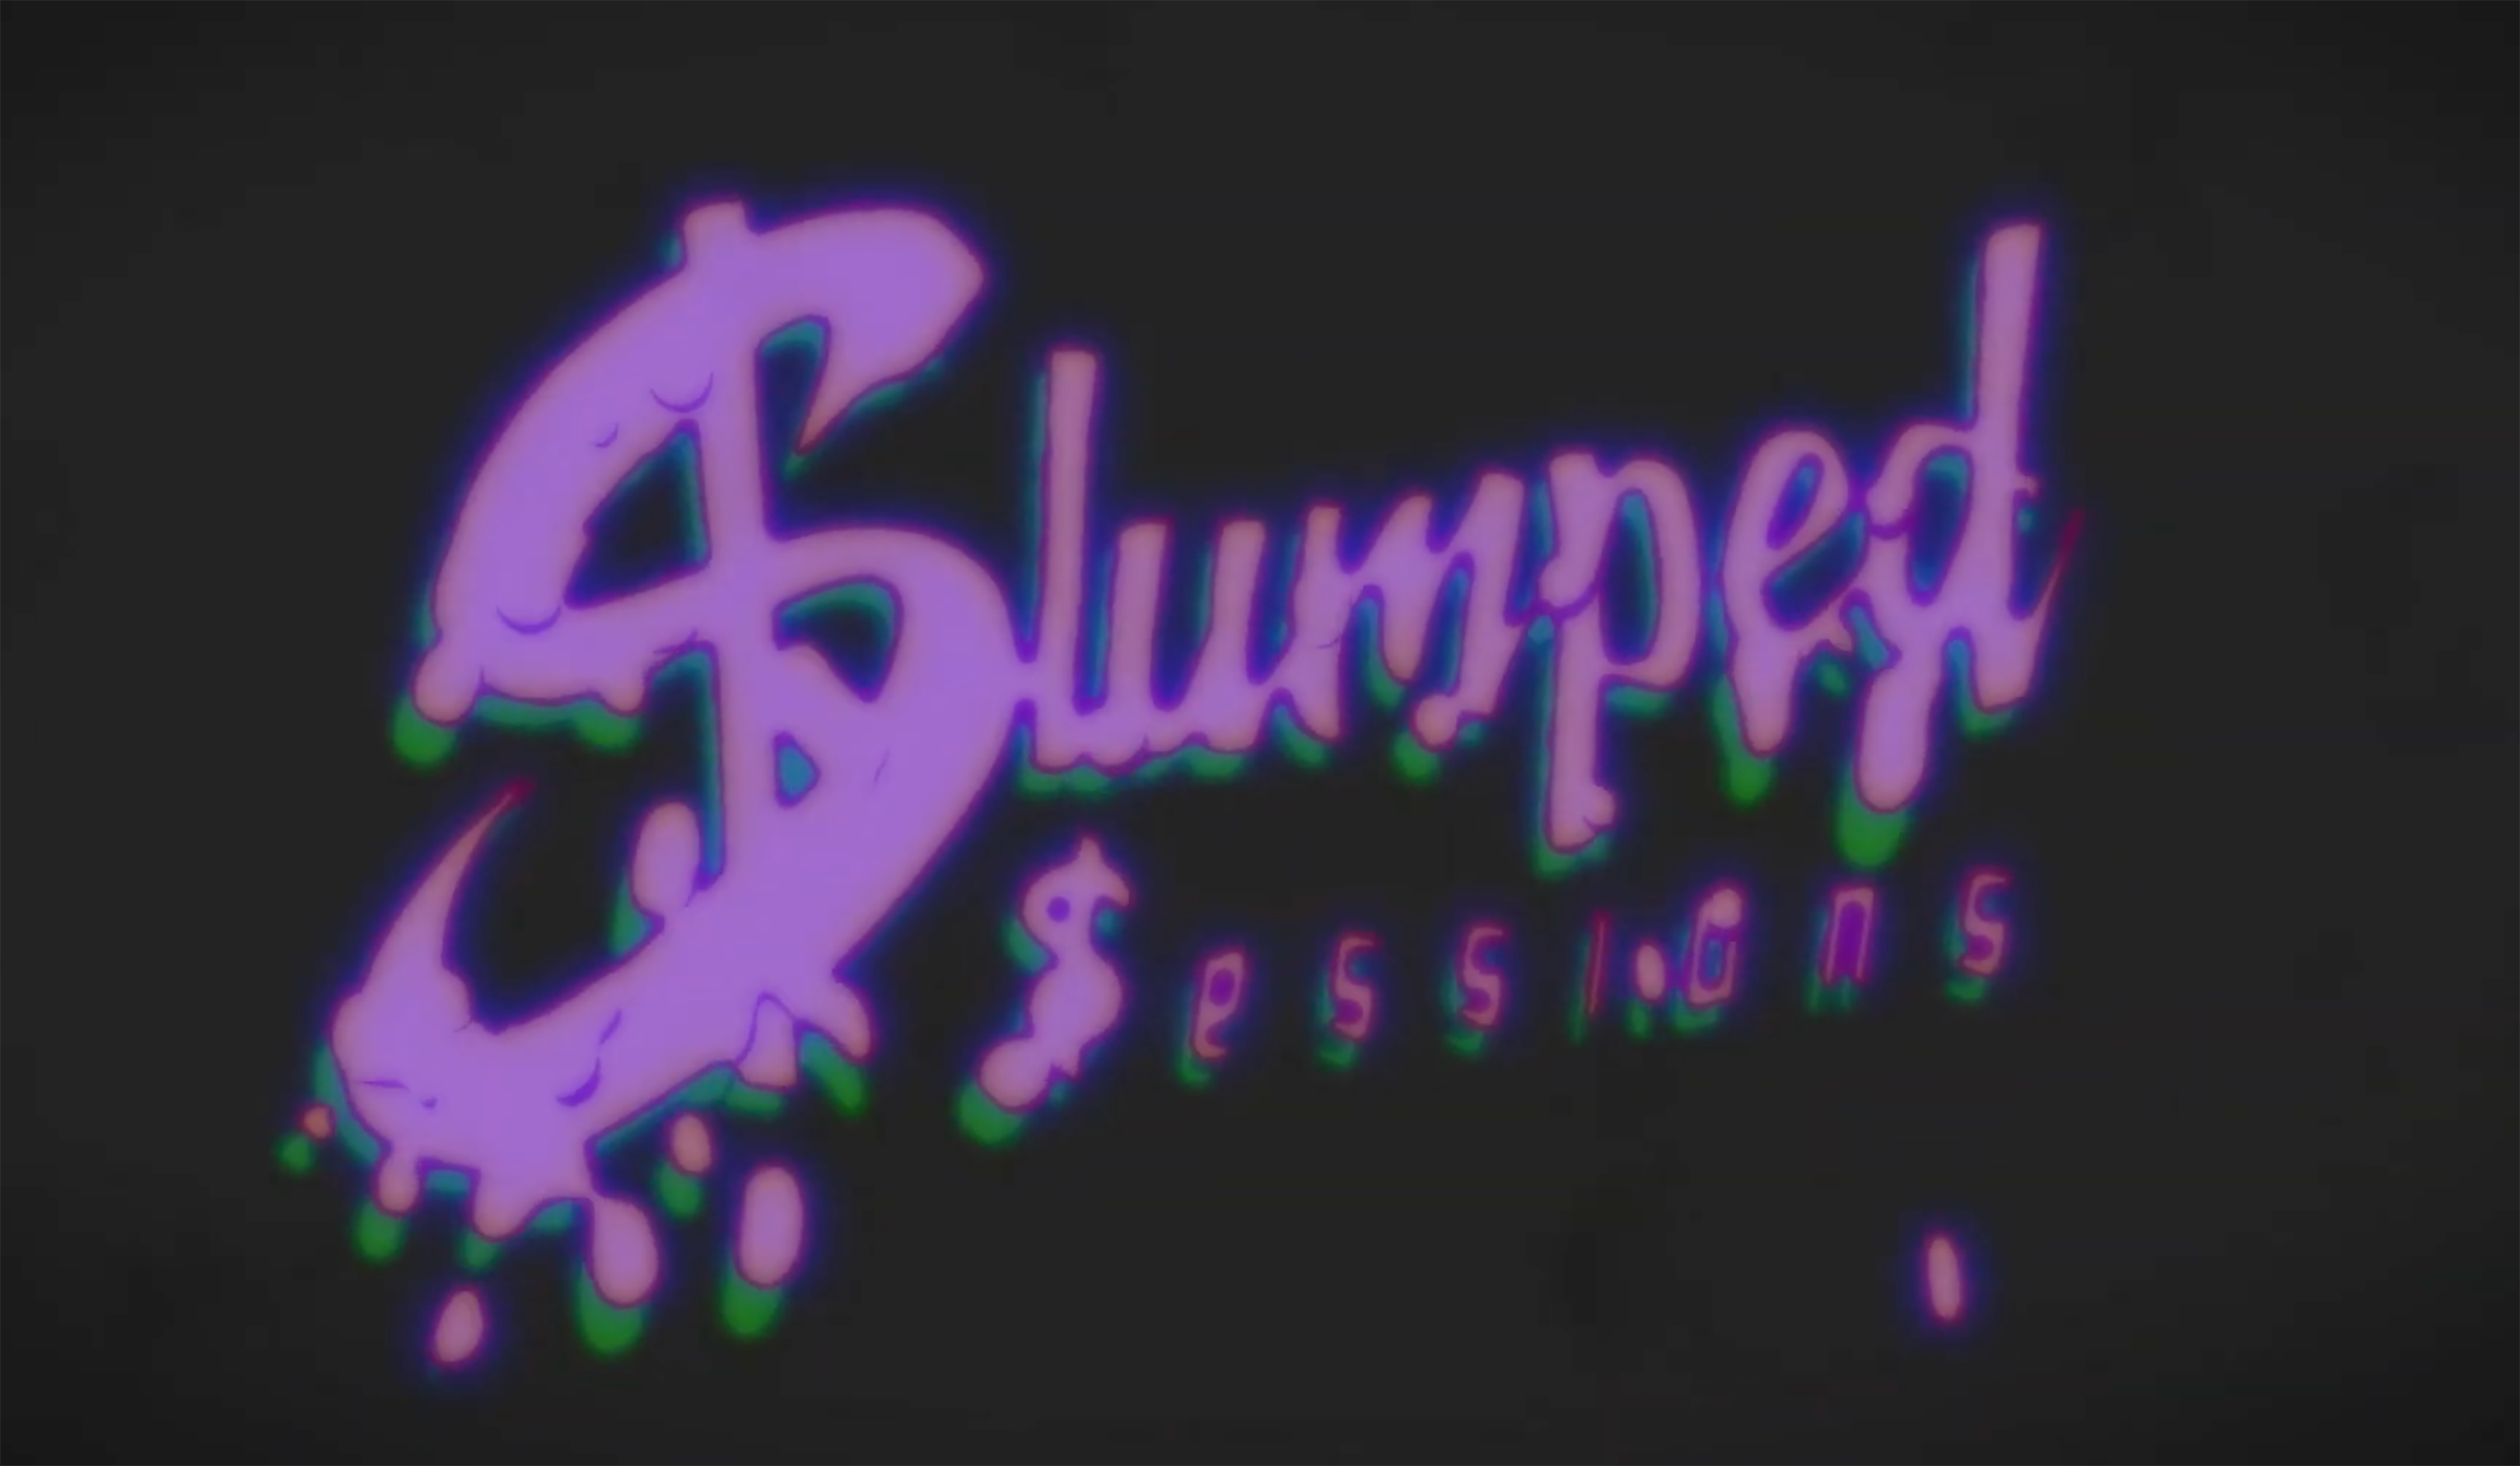 Trill Art Factory Slumped Sessions Interview